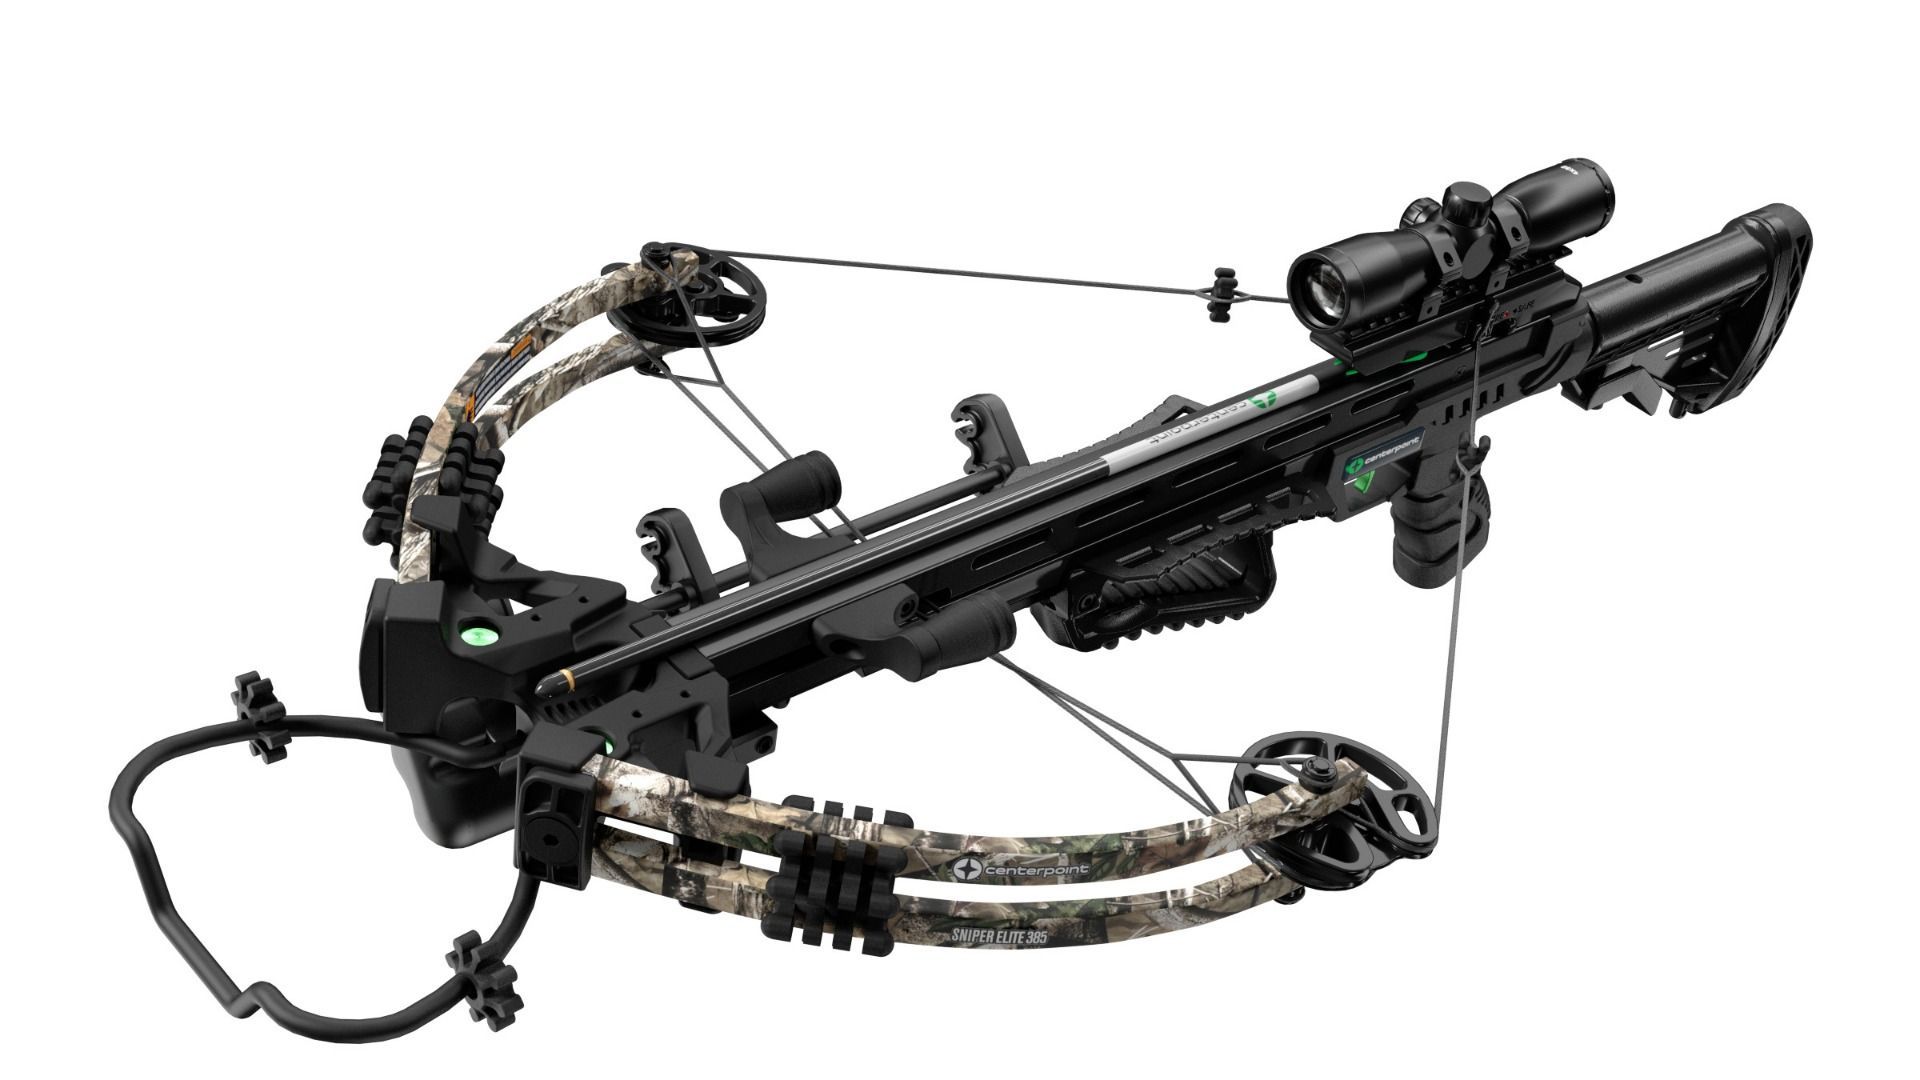 Photo4Less. CenterPoint Sniper Elite 385 Compound Crossbow Package